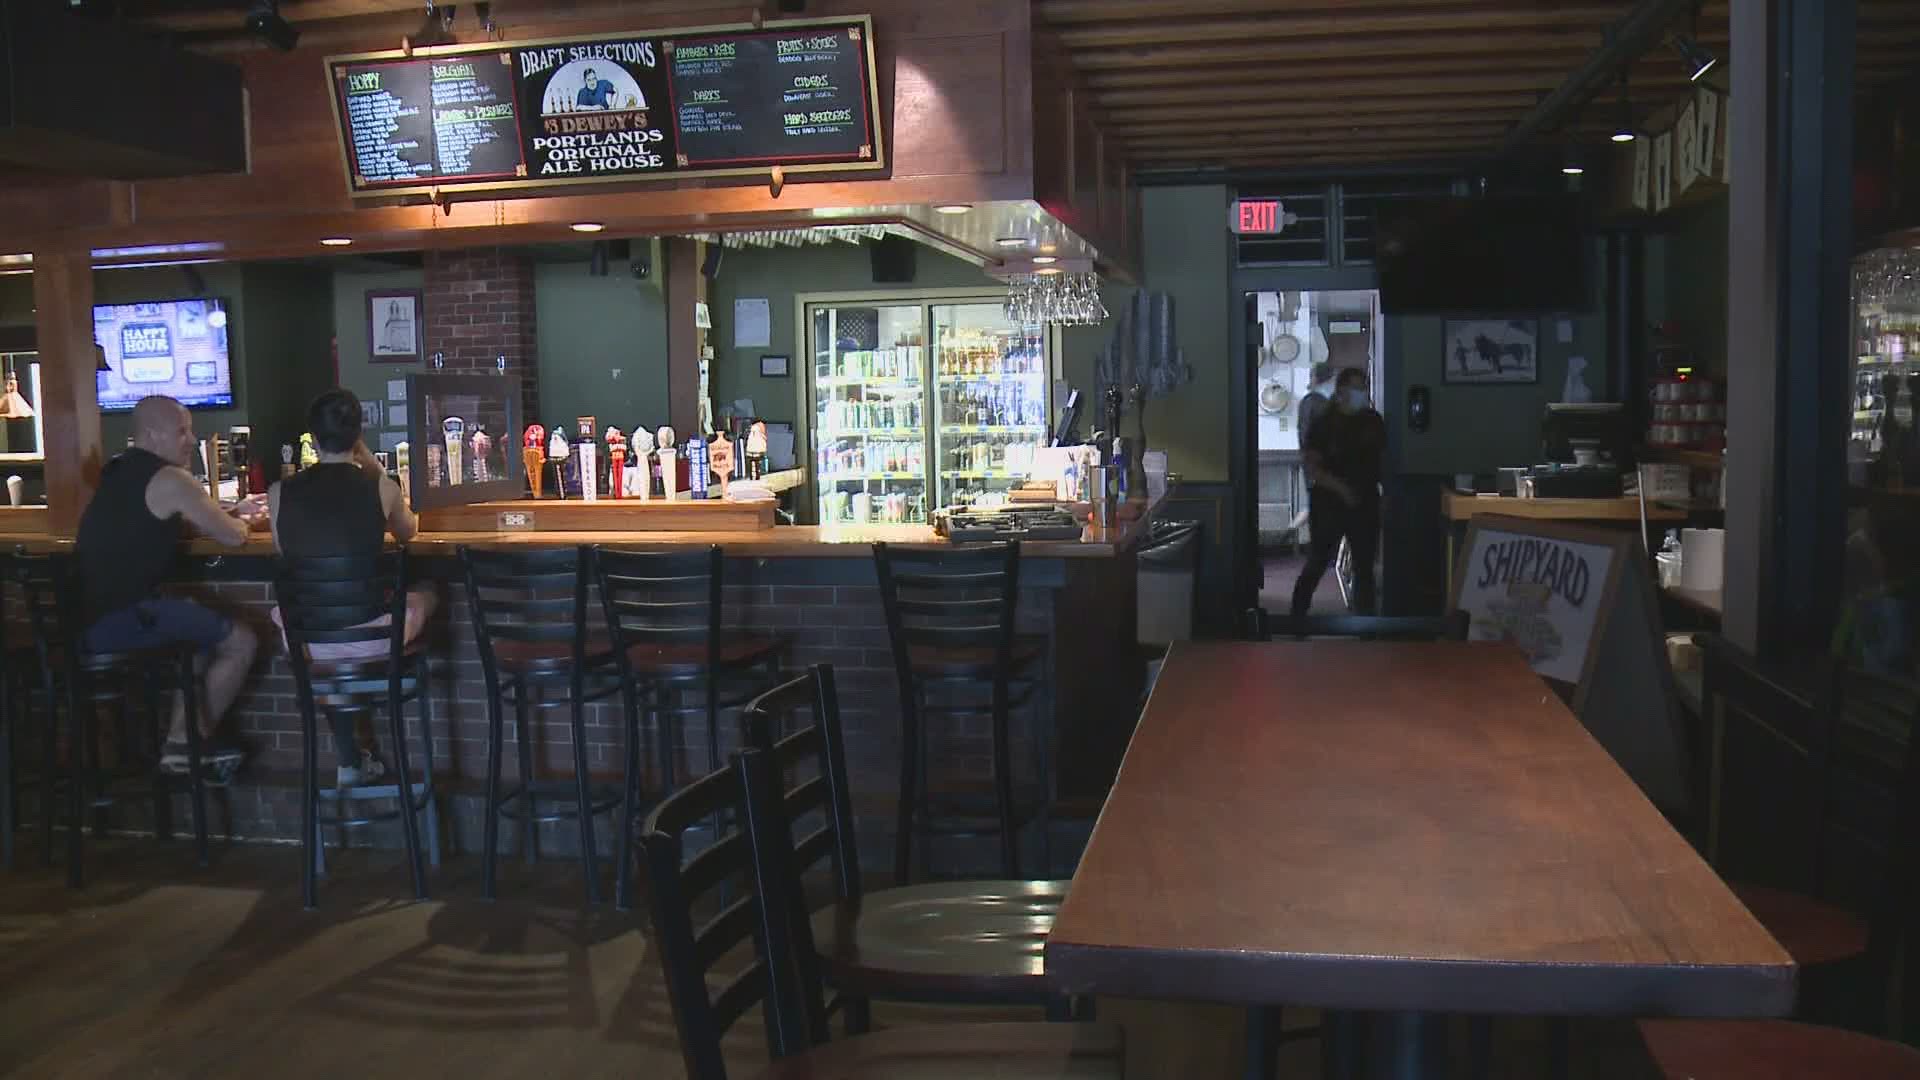 Bar reopenings delayed across Maine amid COVID-19 spread concerns